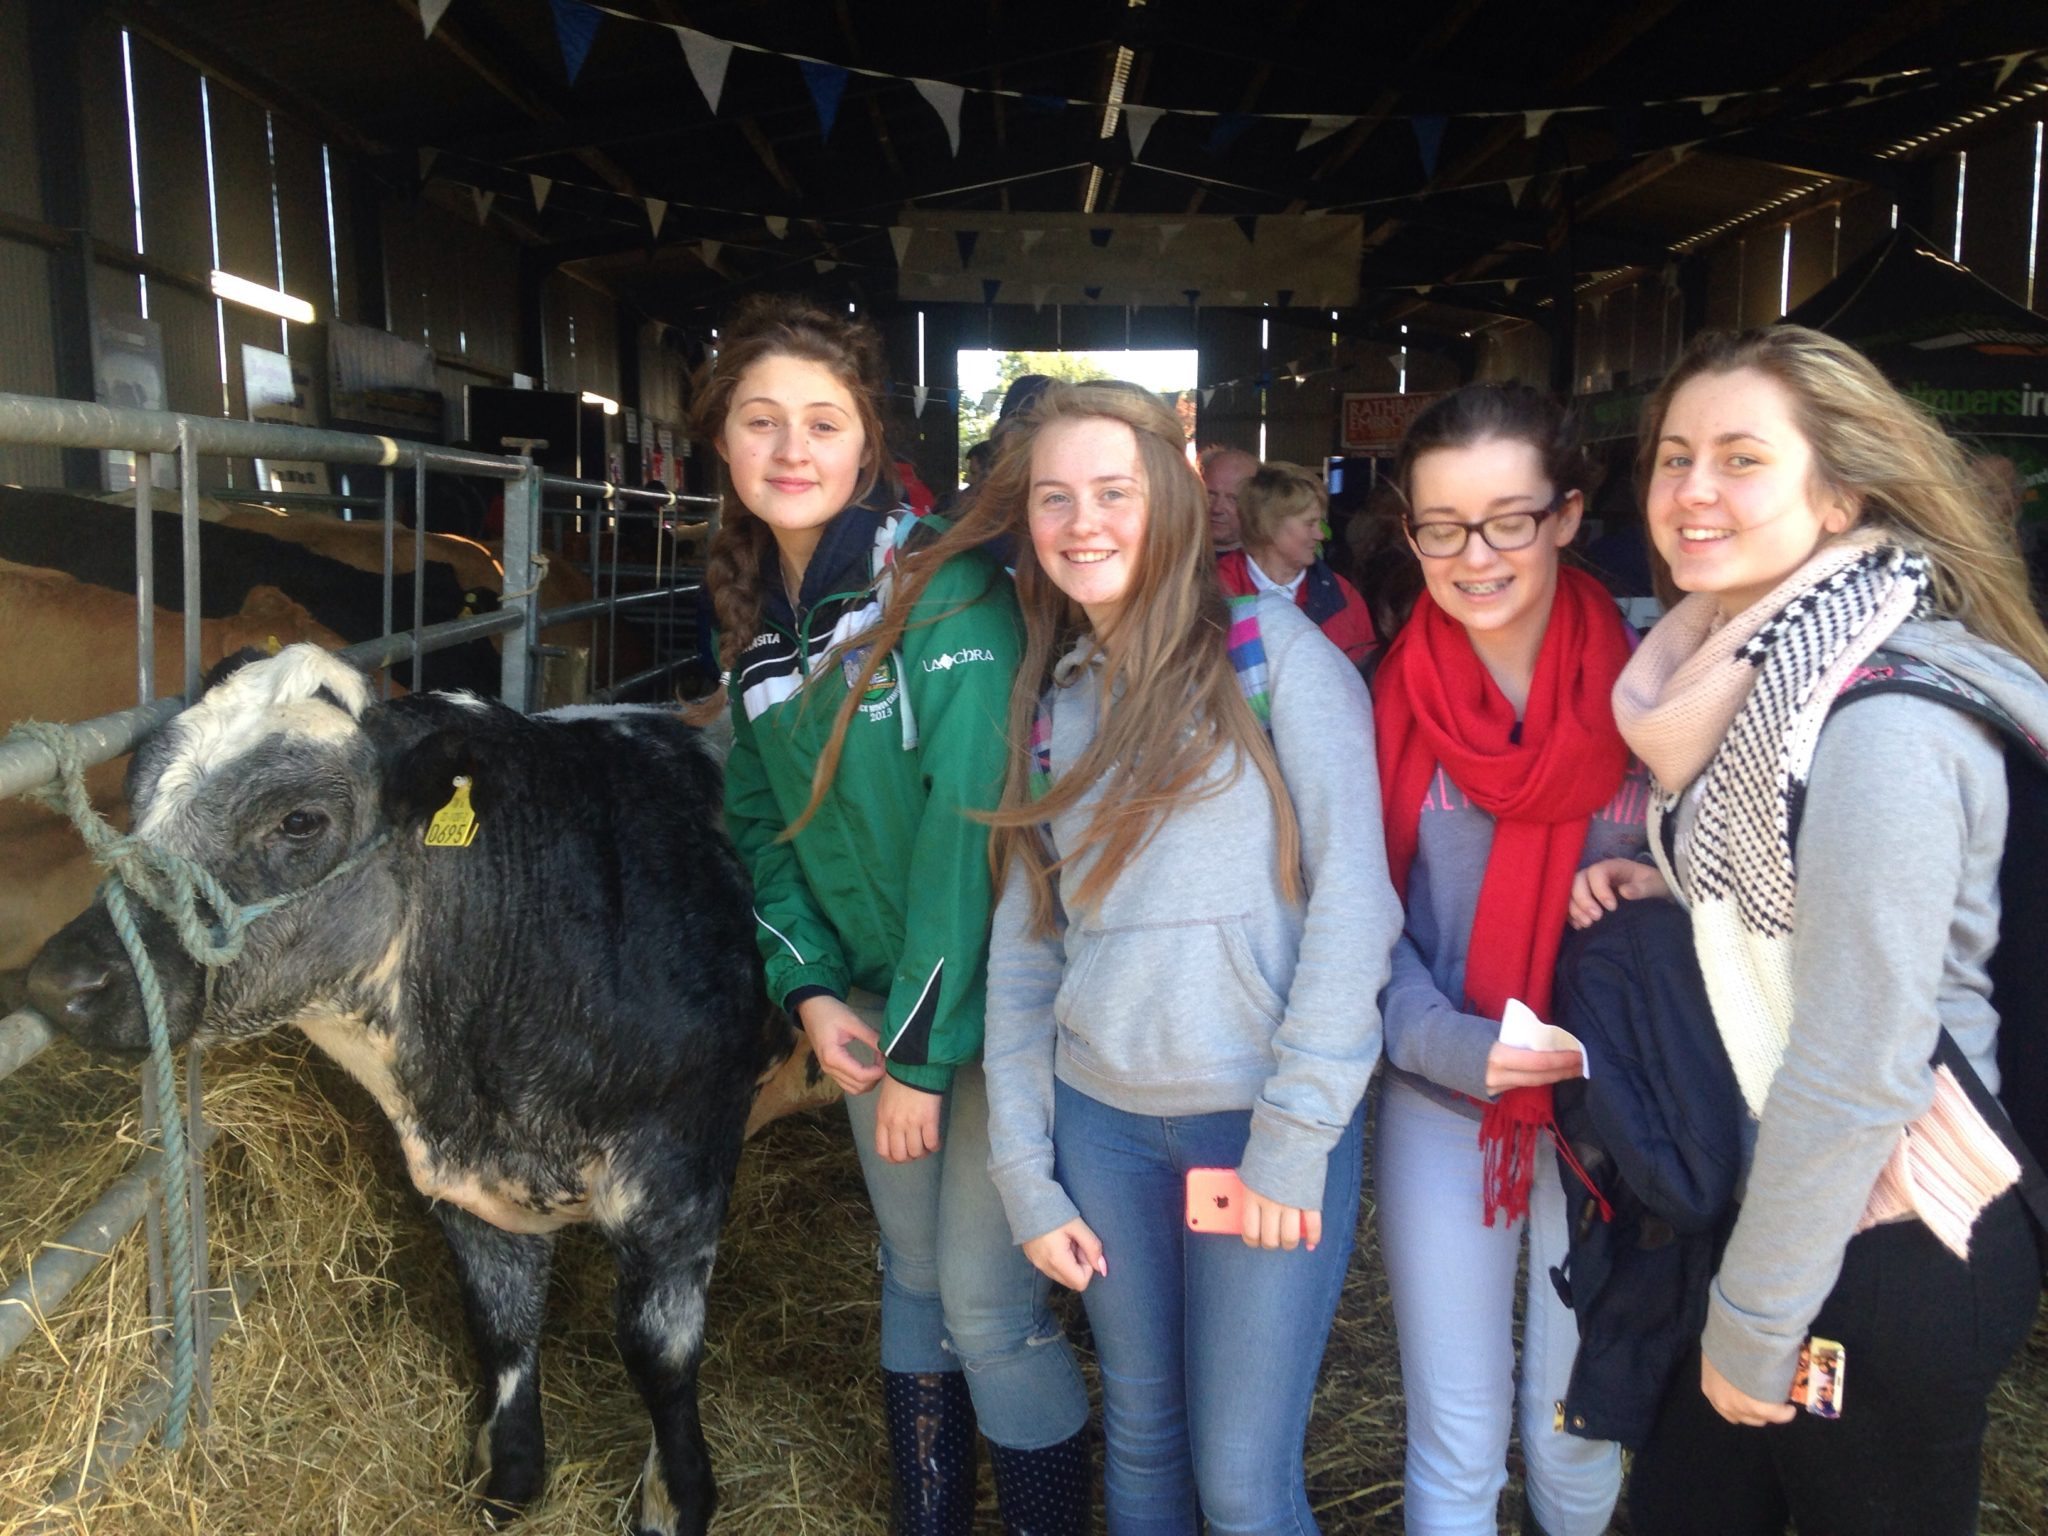 Ploughing 2015: Desmond College TY Students checking livestock